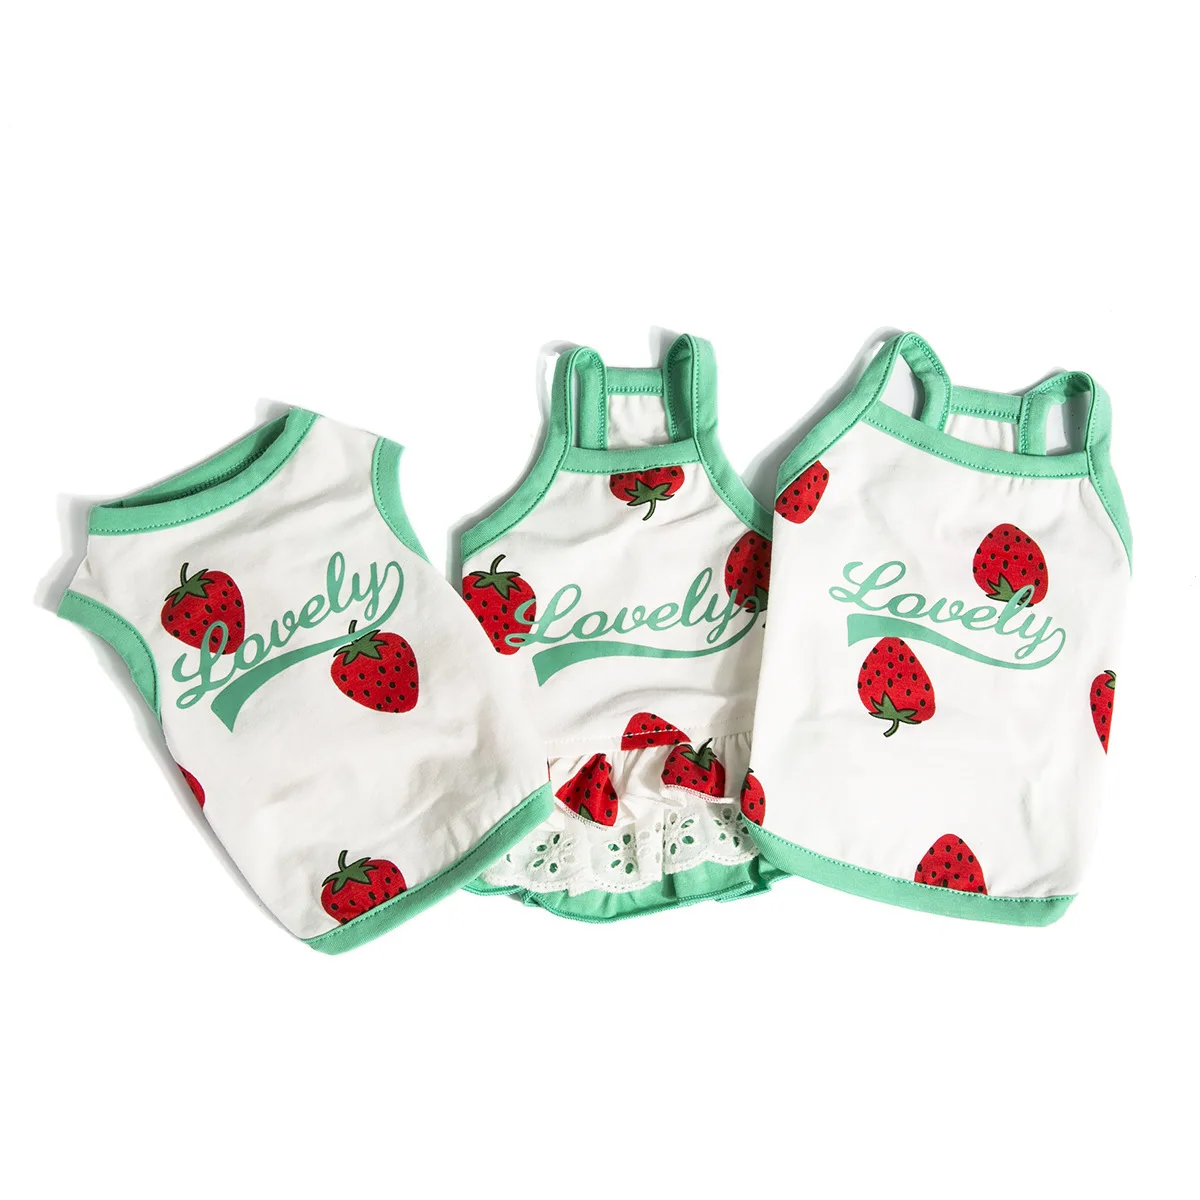 

Summer Cotton Pet Dog T-shirt Vest Sweet Strawberry Pet Clothes for Dogs Cats Puppy Cat Clothing Yorkshire Shih Tzu Shirts Dress